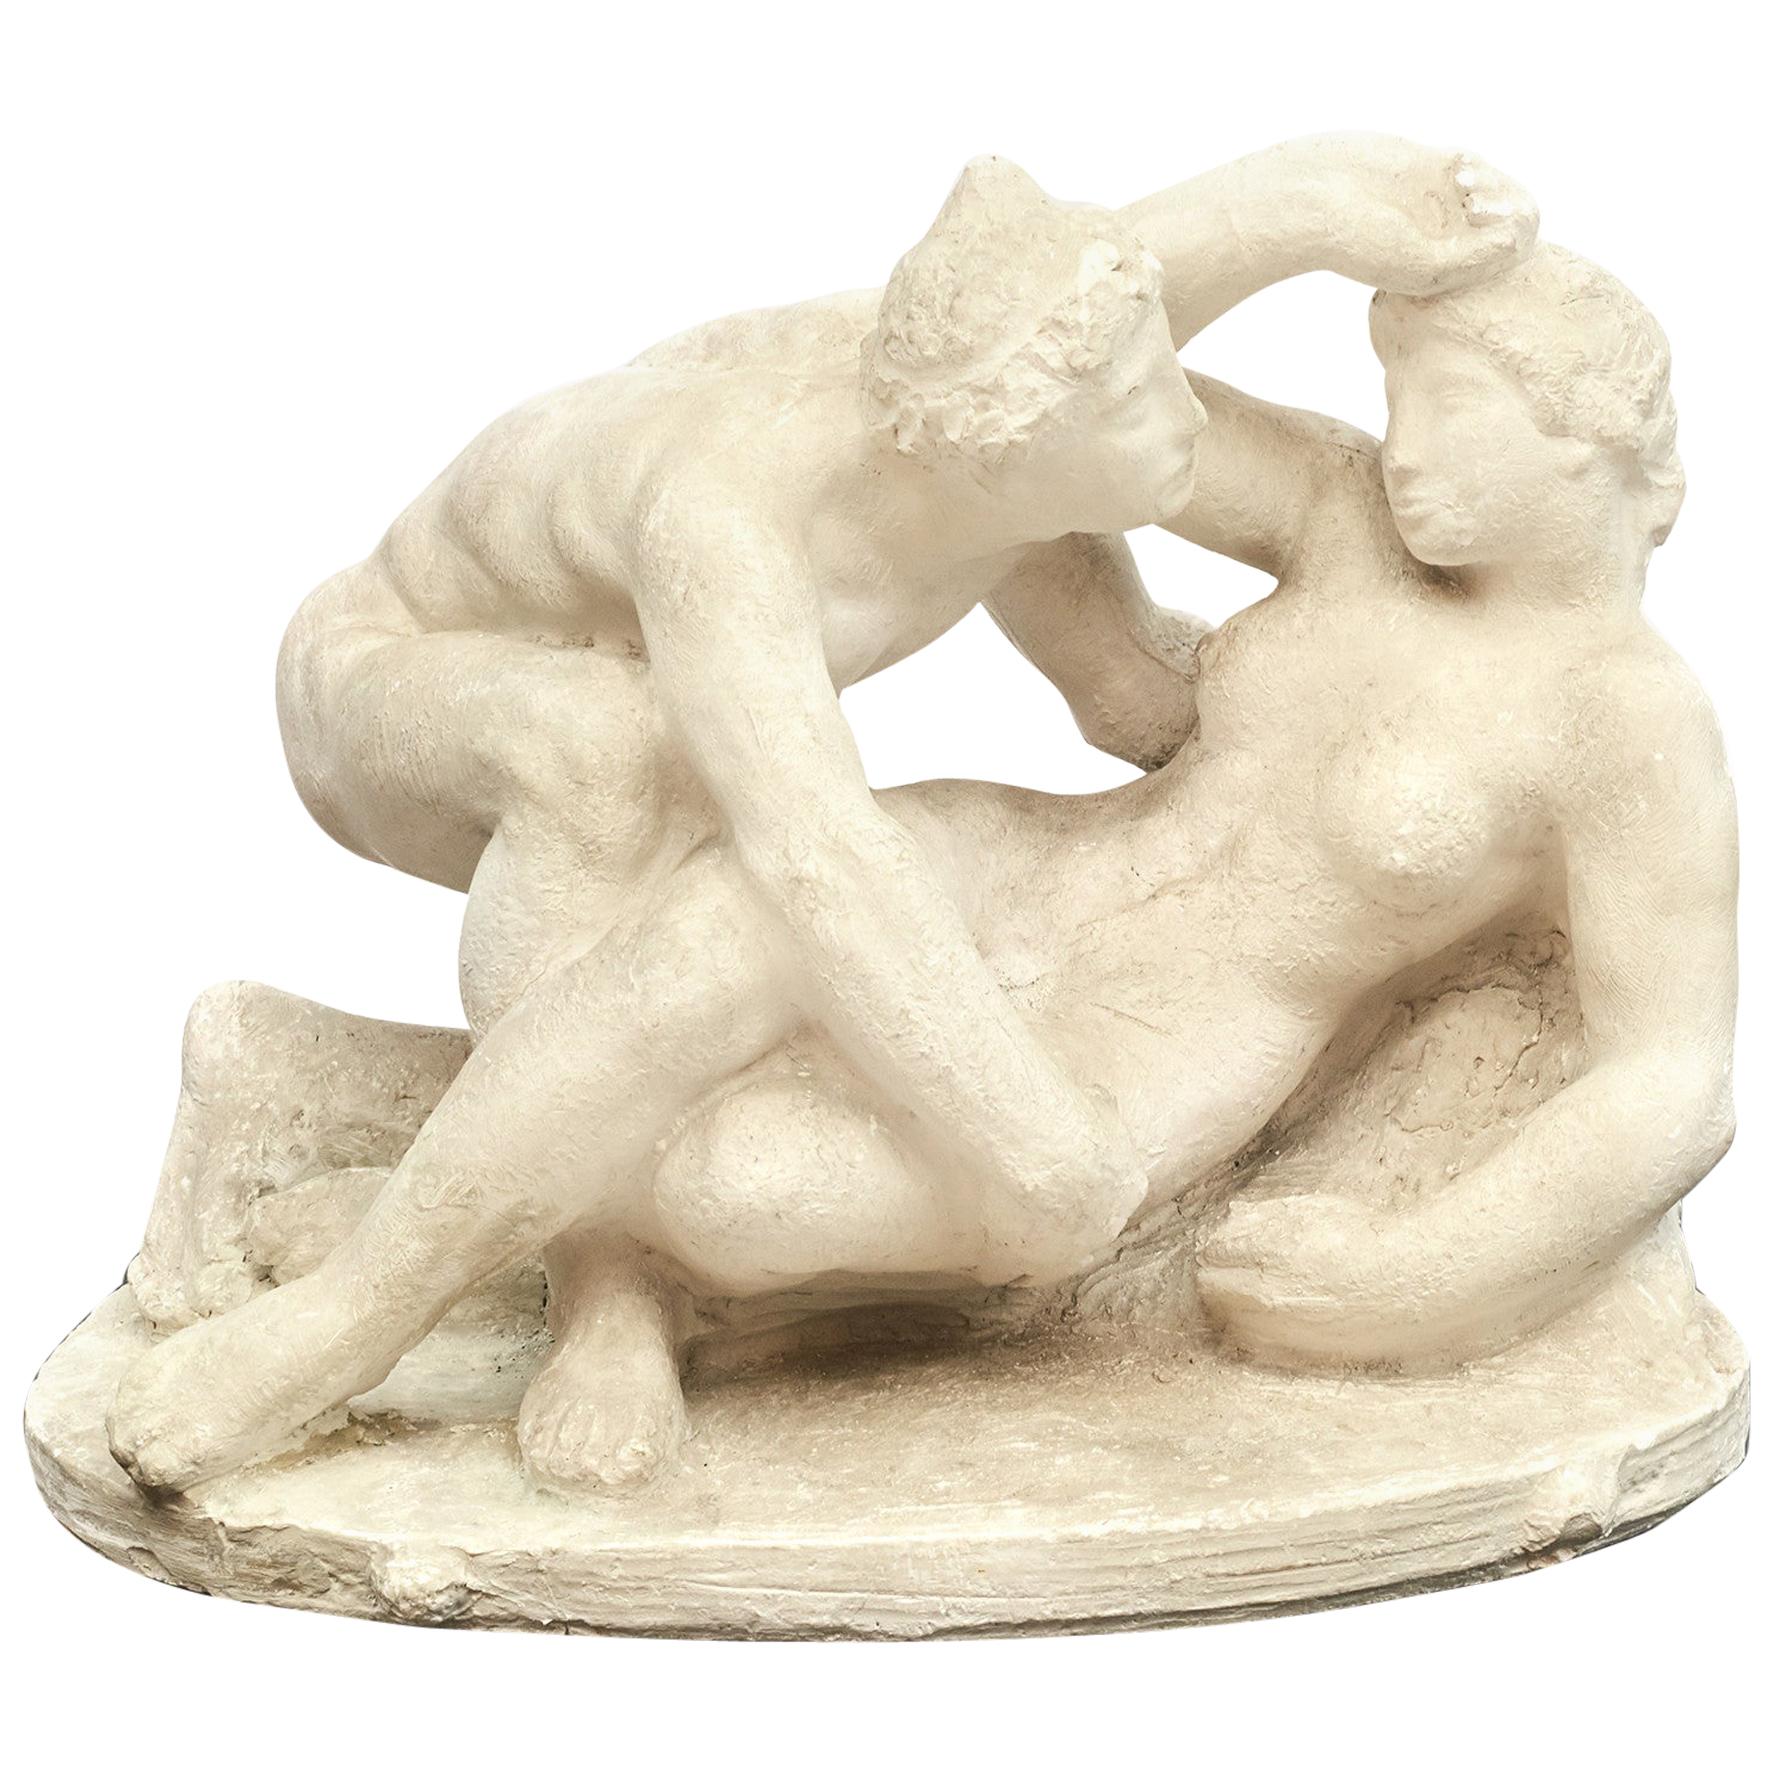 Sculpture with Erotic Theme by Gerhard Henning